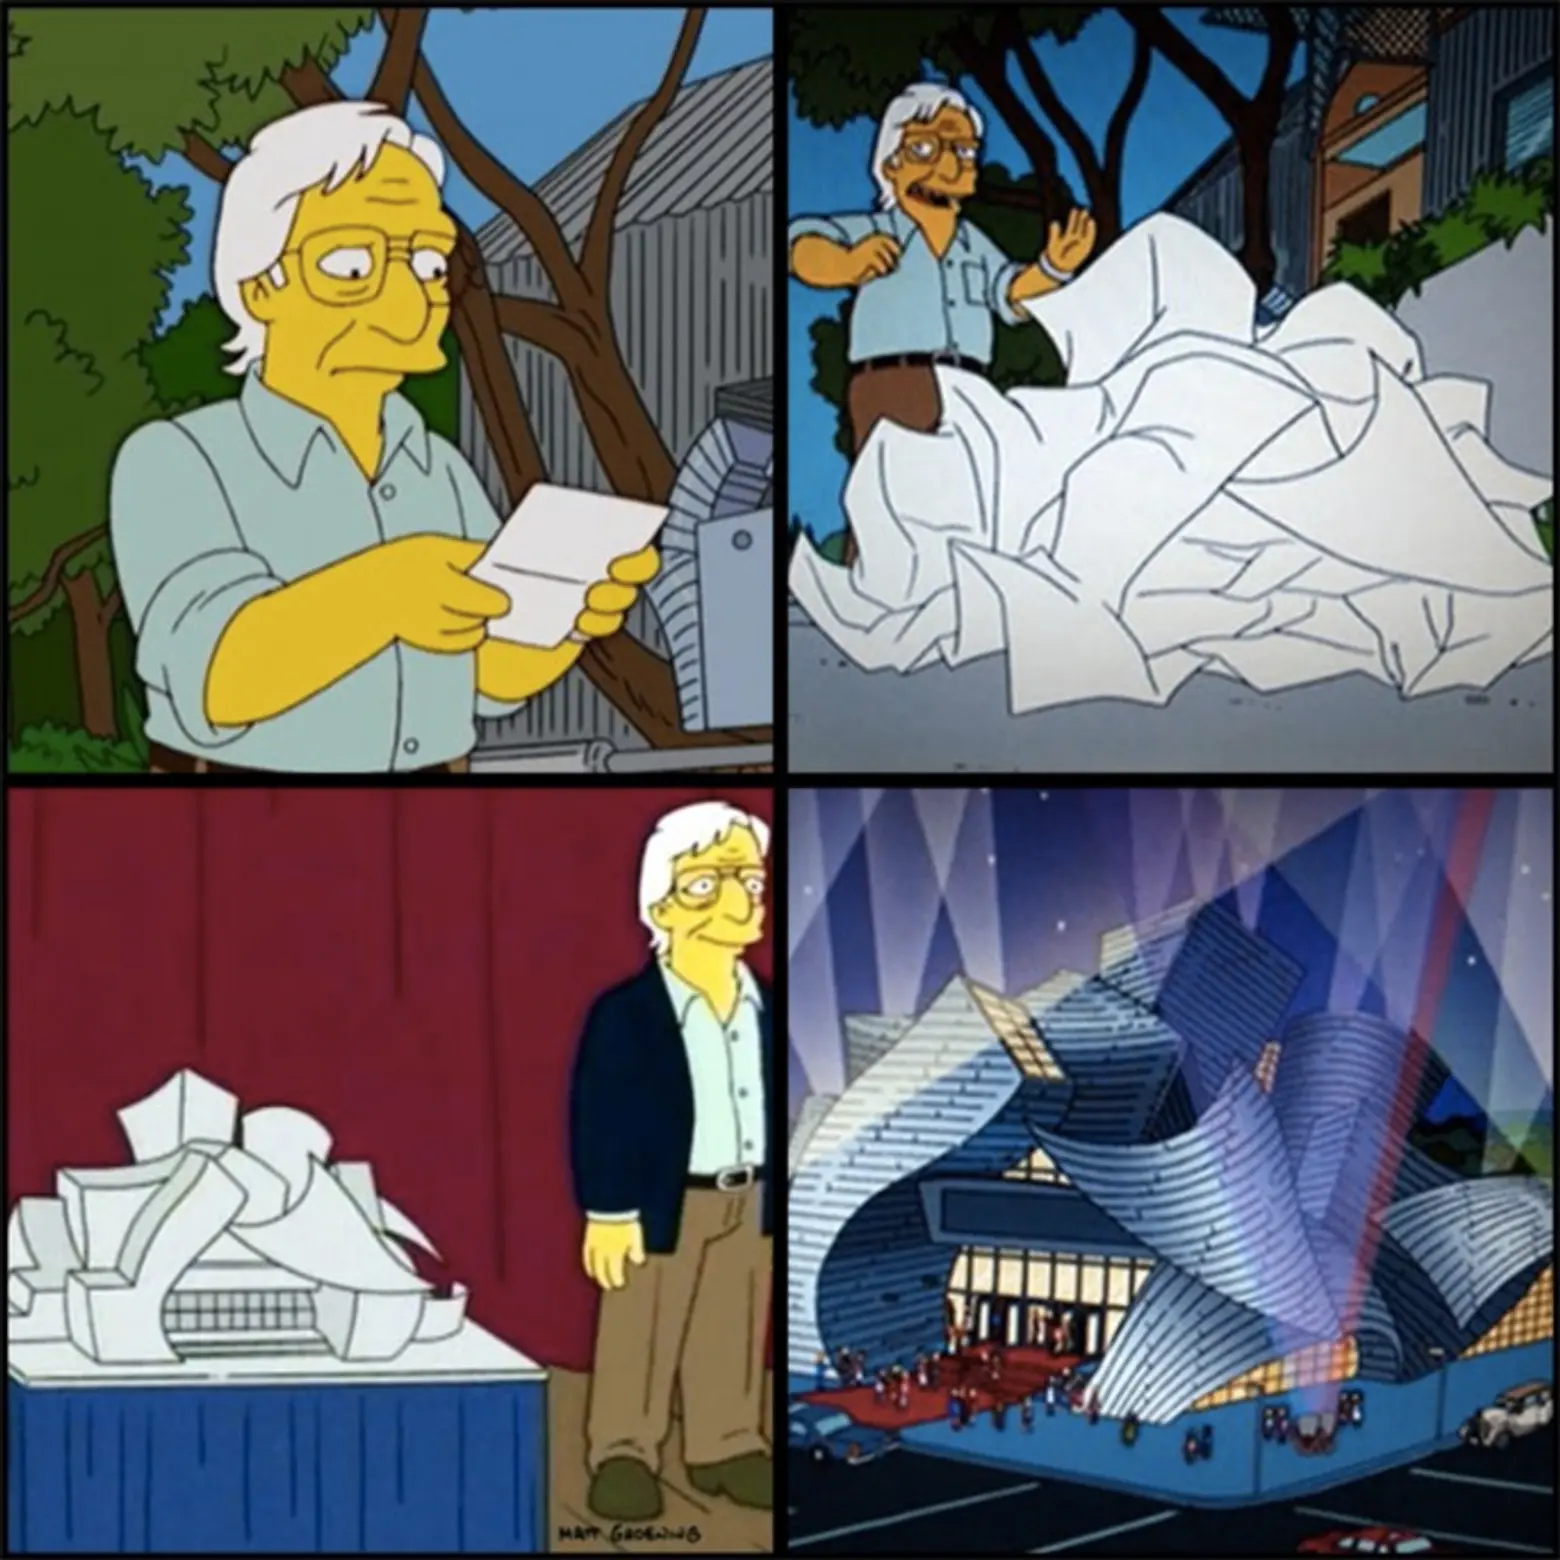 frank gehry on the simpsons, frank gehry crumpled up paper